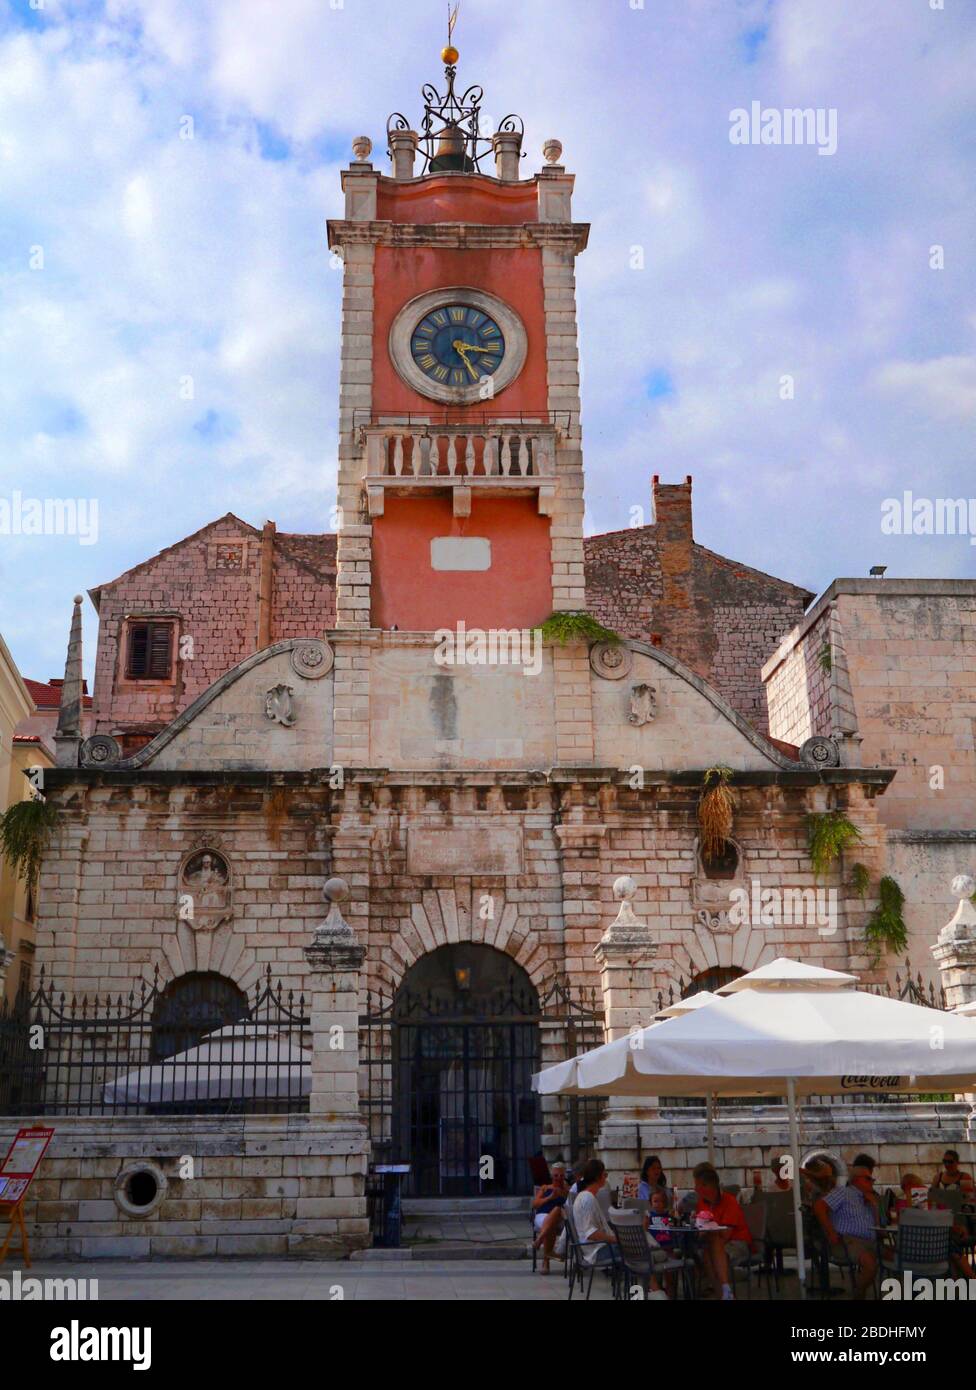 Guard House or Gradska Straza with clock tower dating back to 16th century on People's Square, Zadar, Croatia, Europe Stock Photo